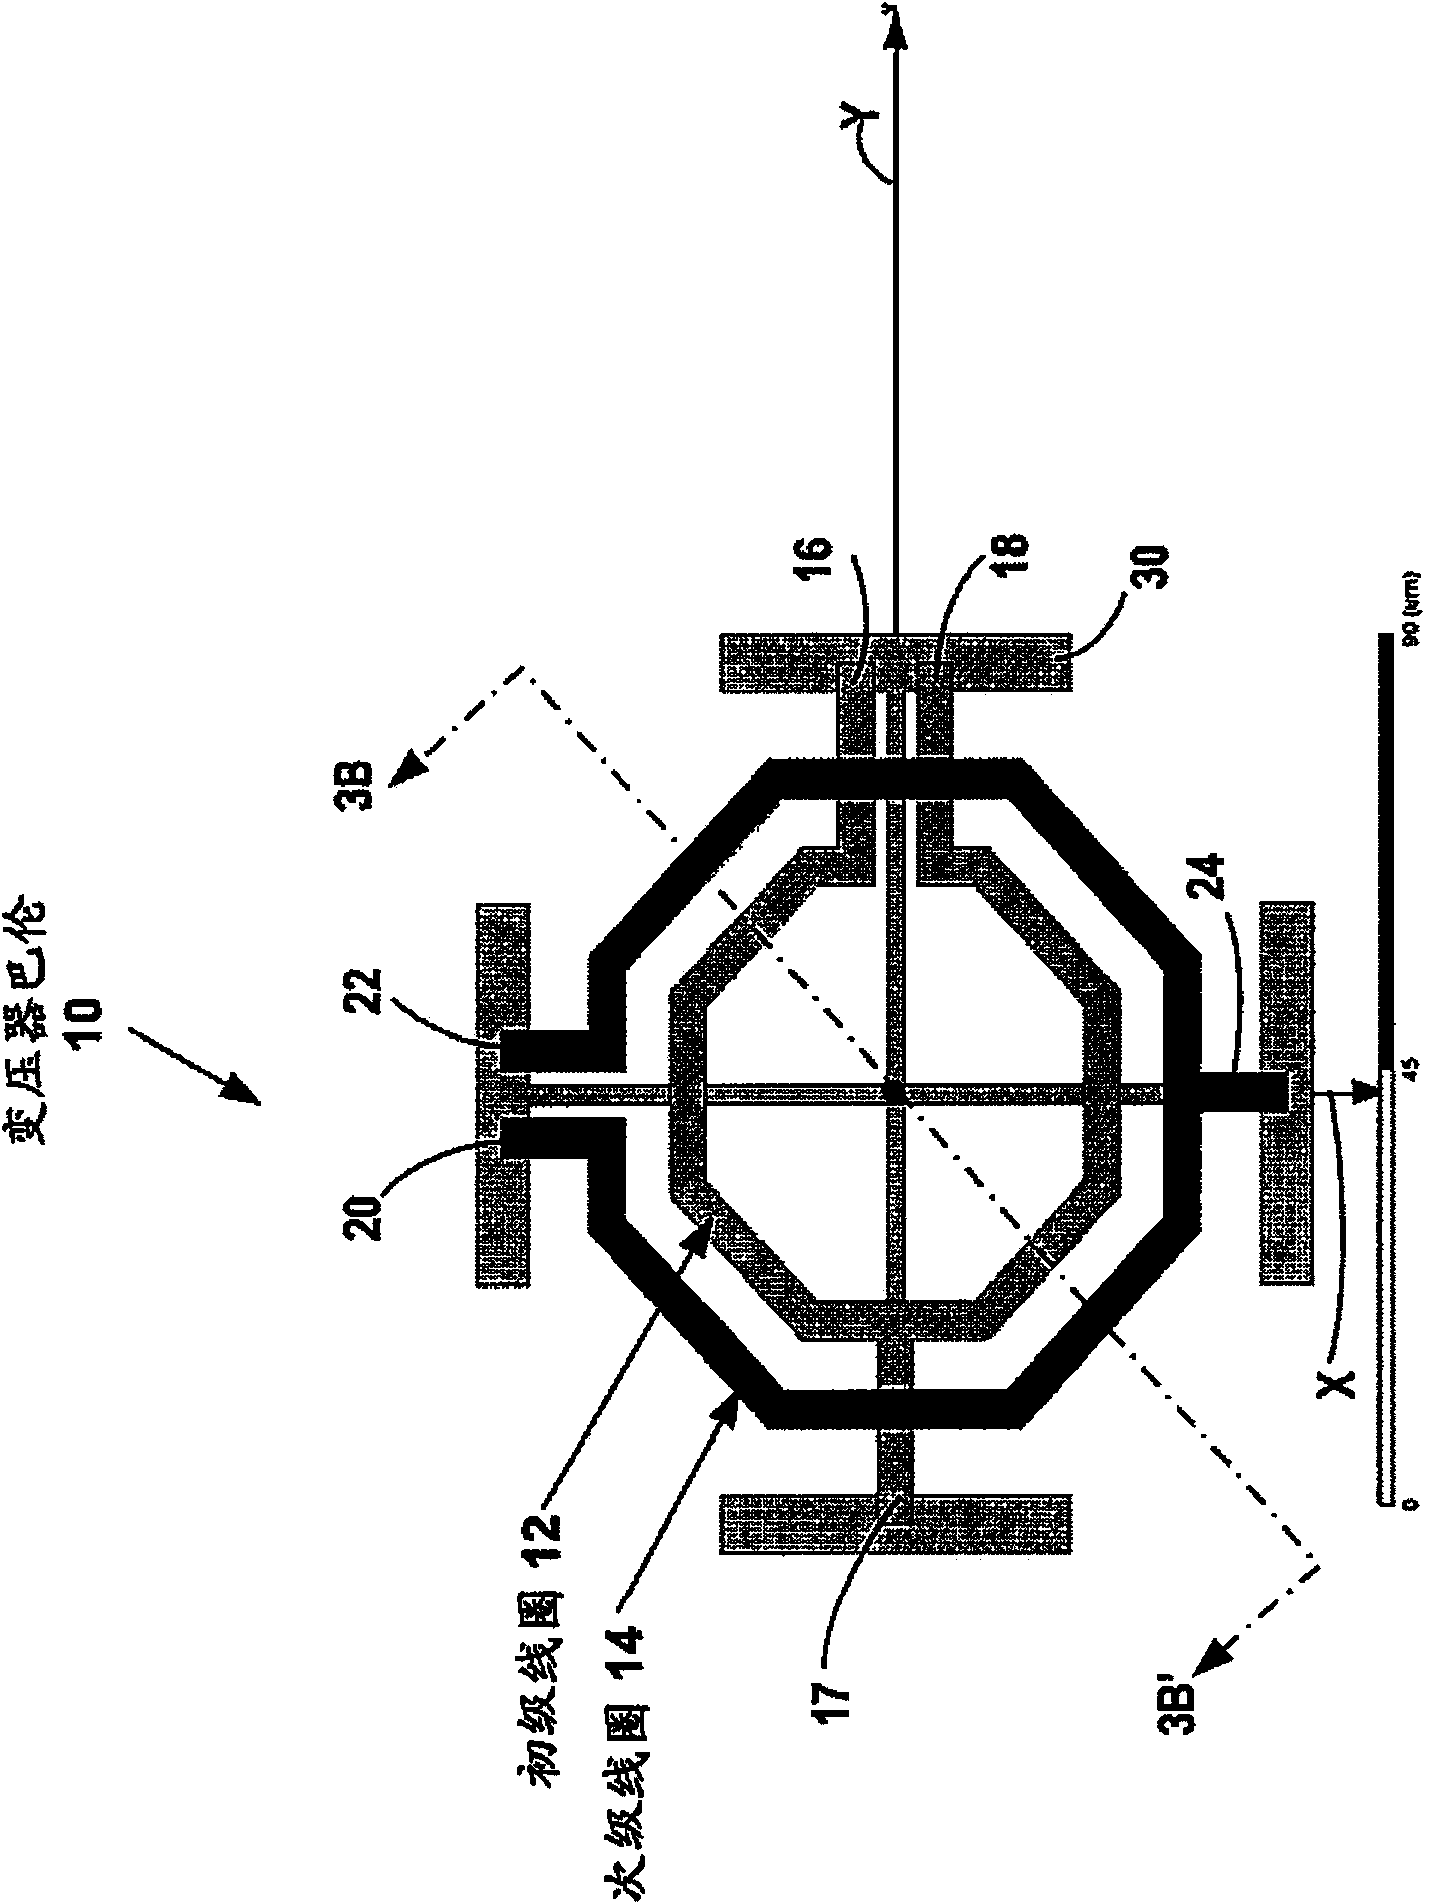 Integrated transformer balun with enhanced common-mode rejection for radio frequency, microwave, and millimeter-wave integrated circuits